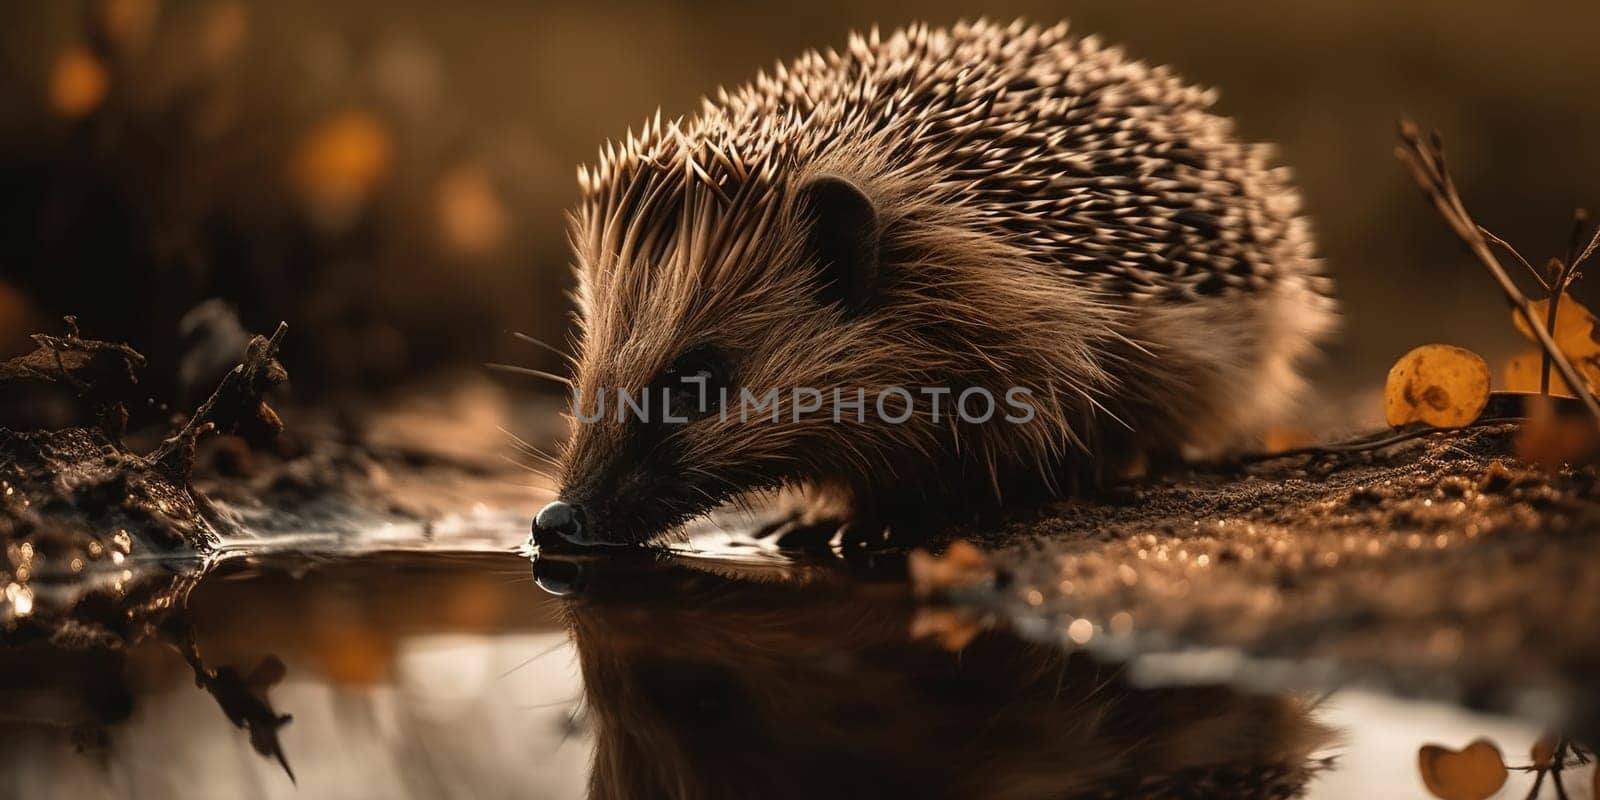 Wild Hedgehog Drinks Water From The Puddle In The Forest, Animal In Natural Habitat